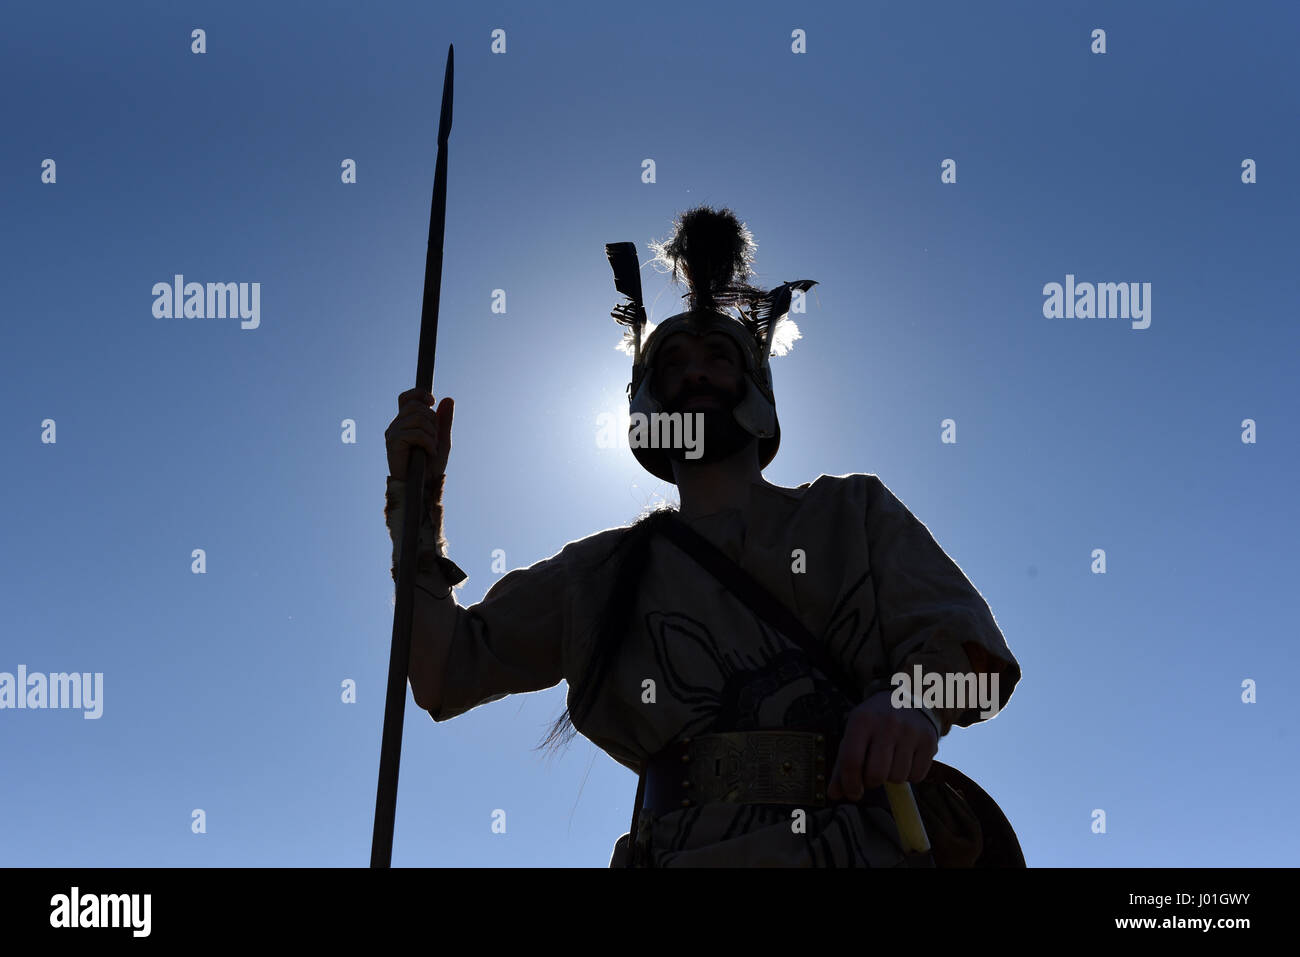 Garray, Spain. 08th Apr, 2017. A man wearing a costume of Celtiberian warriors during a representation in the ancient Celtiberian settlement of Numantia, famous for its role in the Celtiberian War, in Soria, north of Spain. Credit: Jorge Sanz/Pacific Press/Alamy Live News Stock Photo